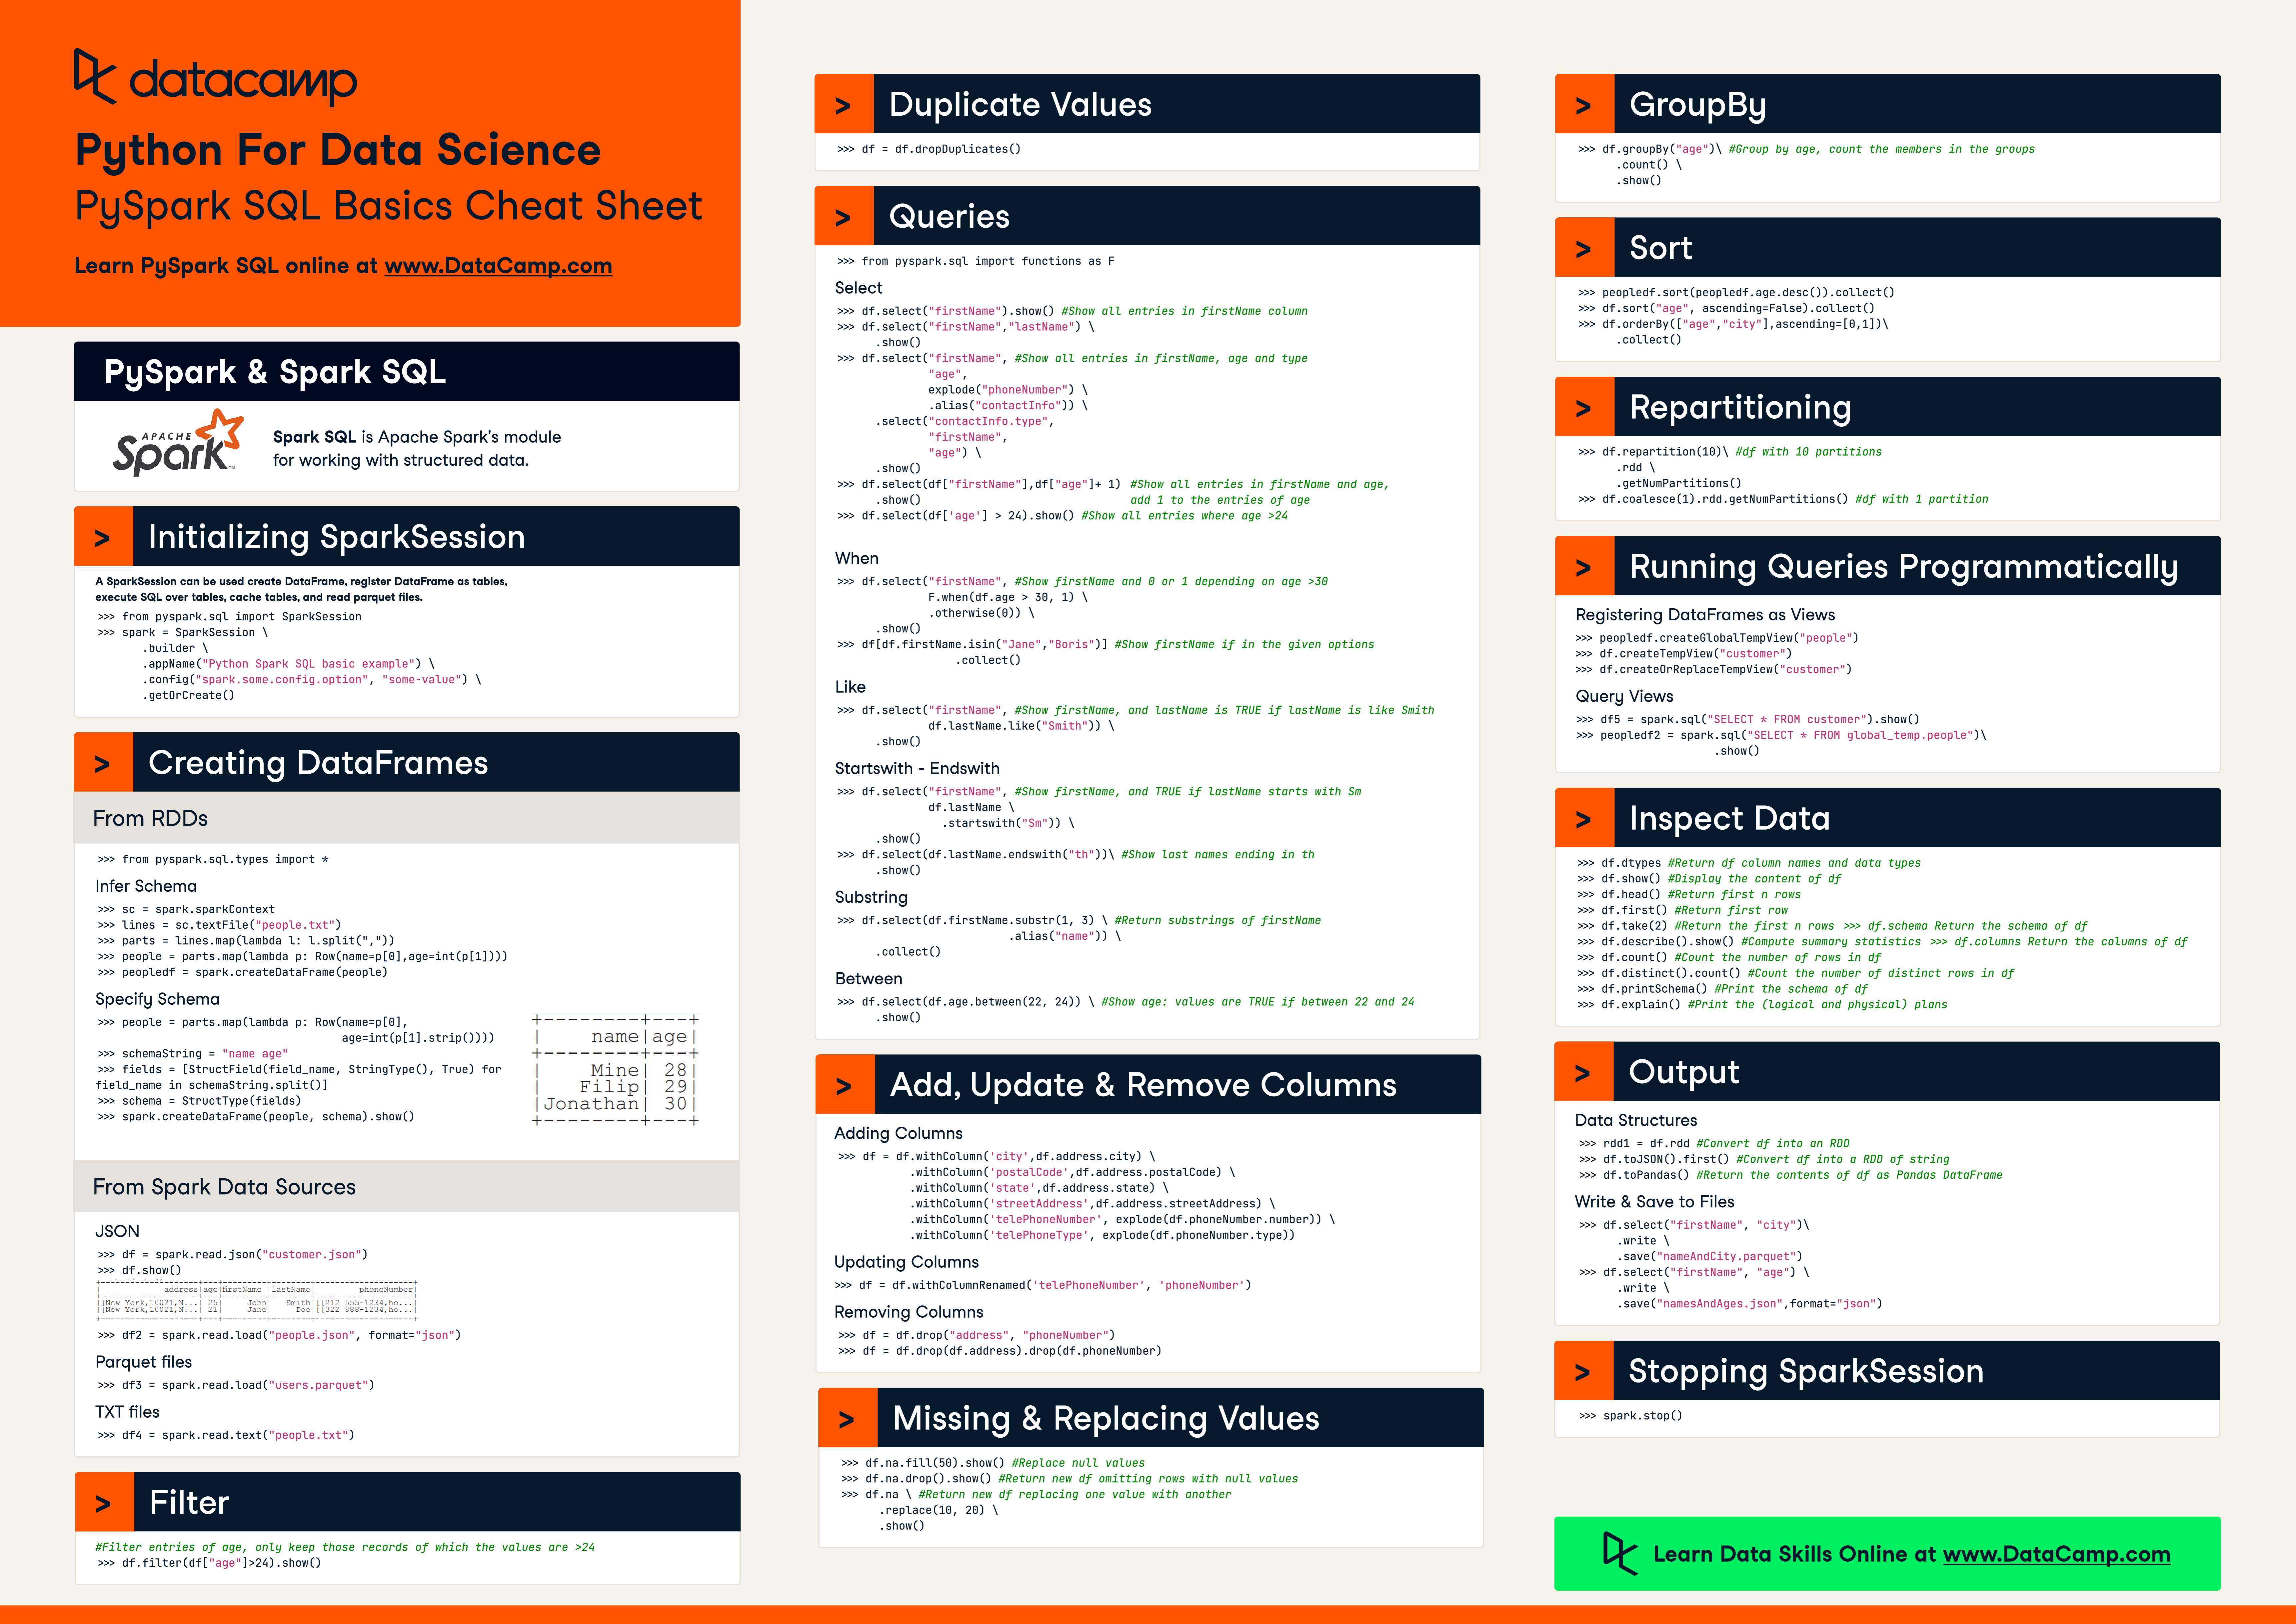 Python for Data Science Cheat Sheet